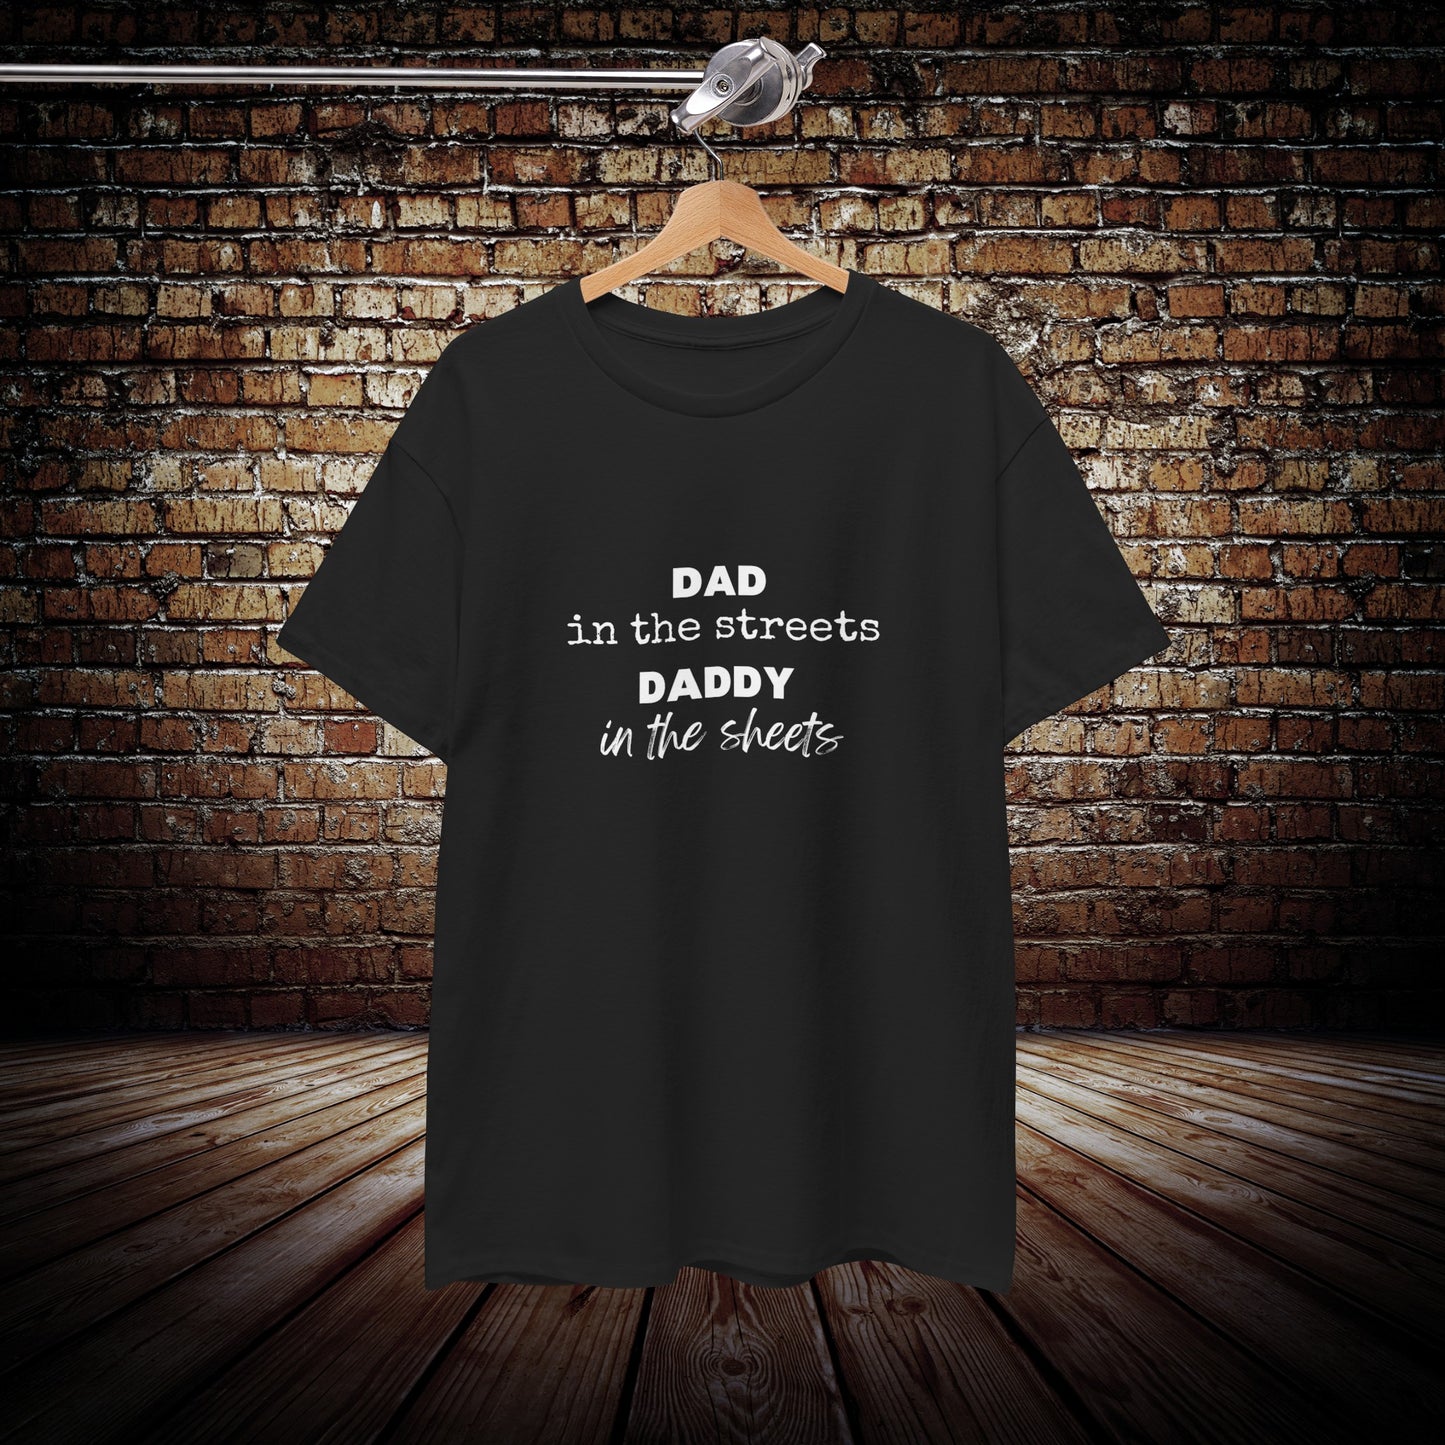 Dad in the streets funny dad shirt